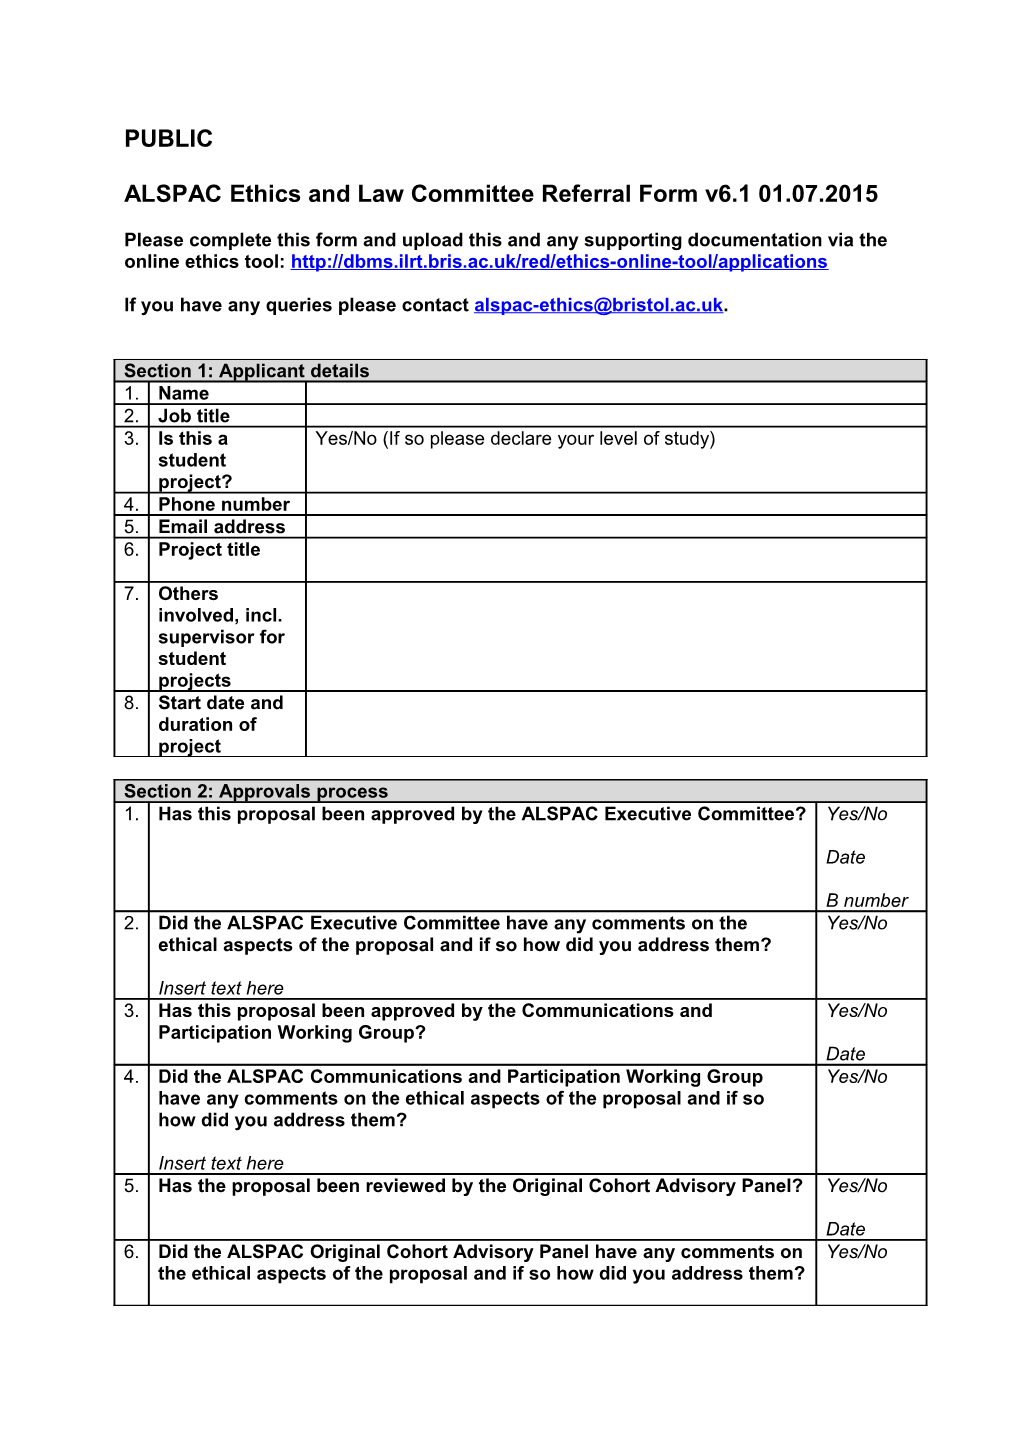 ALSPAC Ethics and Law Committee Referral Form V6.1 01.07.2015